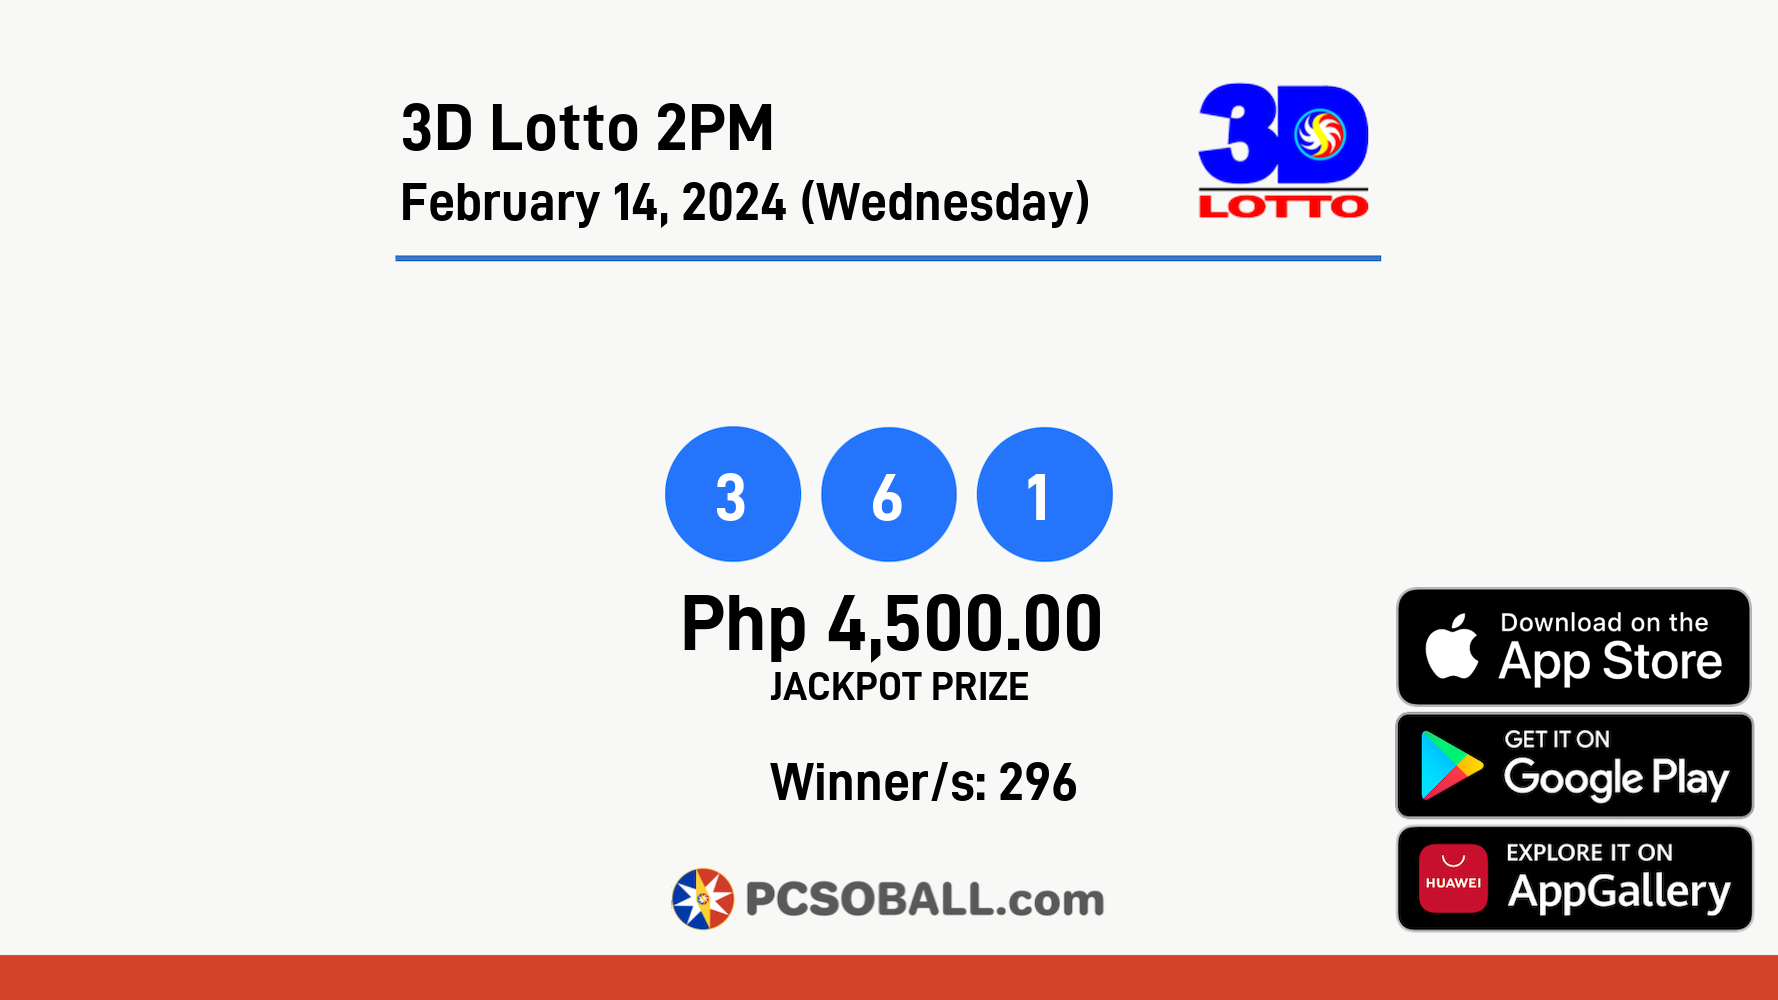 3D Lotto 2PM February 14, 2024 (Wednesday) Result